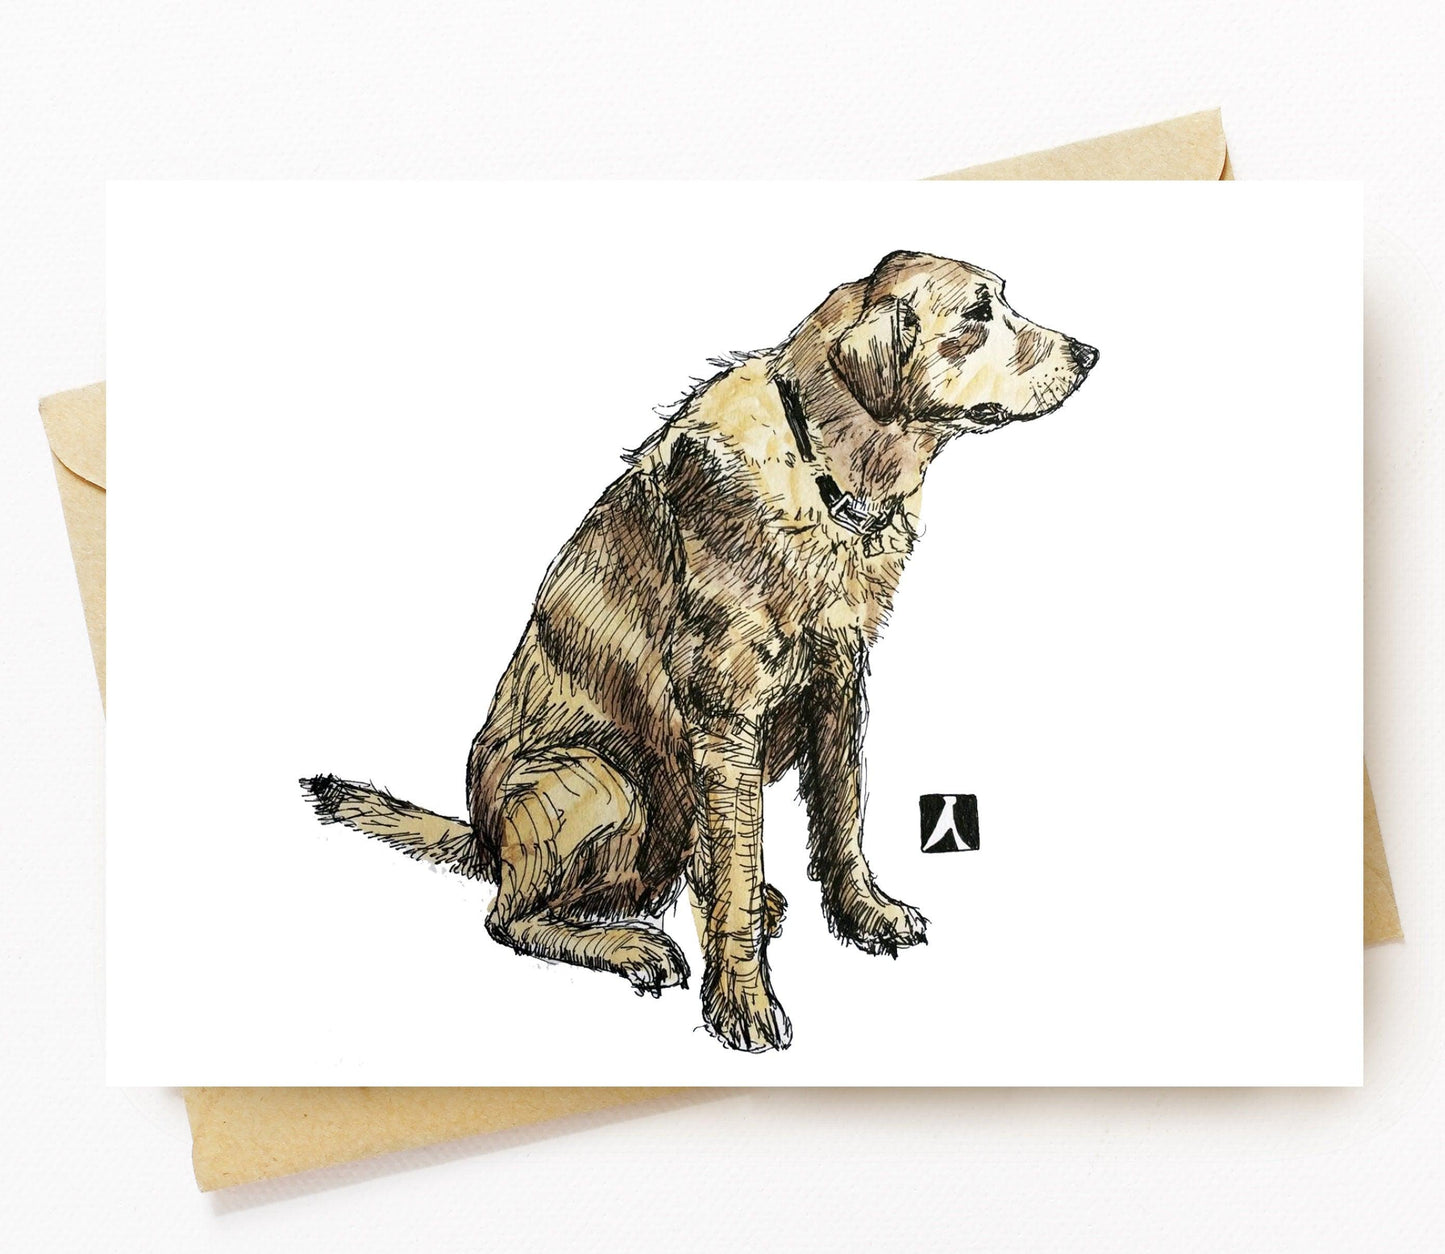 BellavanceInk: Greeting Card With Pen & Ink Watercolor Illustration Of A Golden Retriever 5 x 7 Inches - BellavanceInk